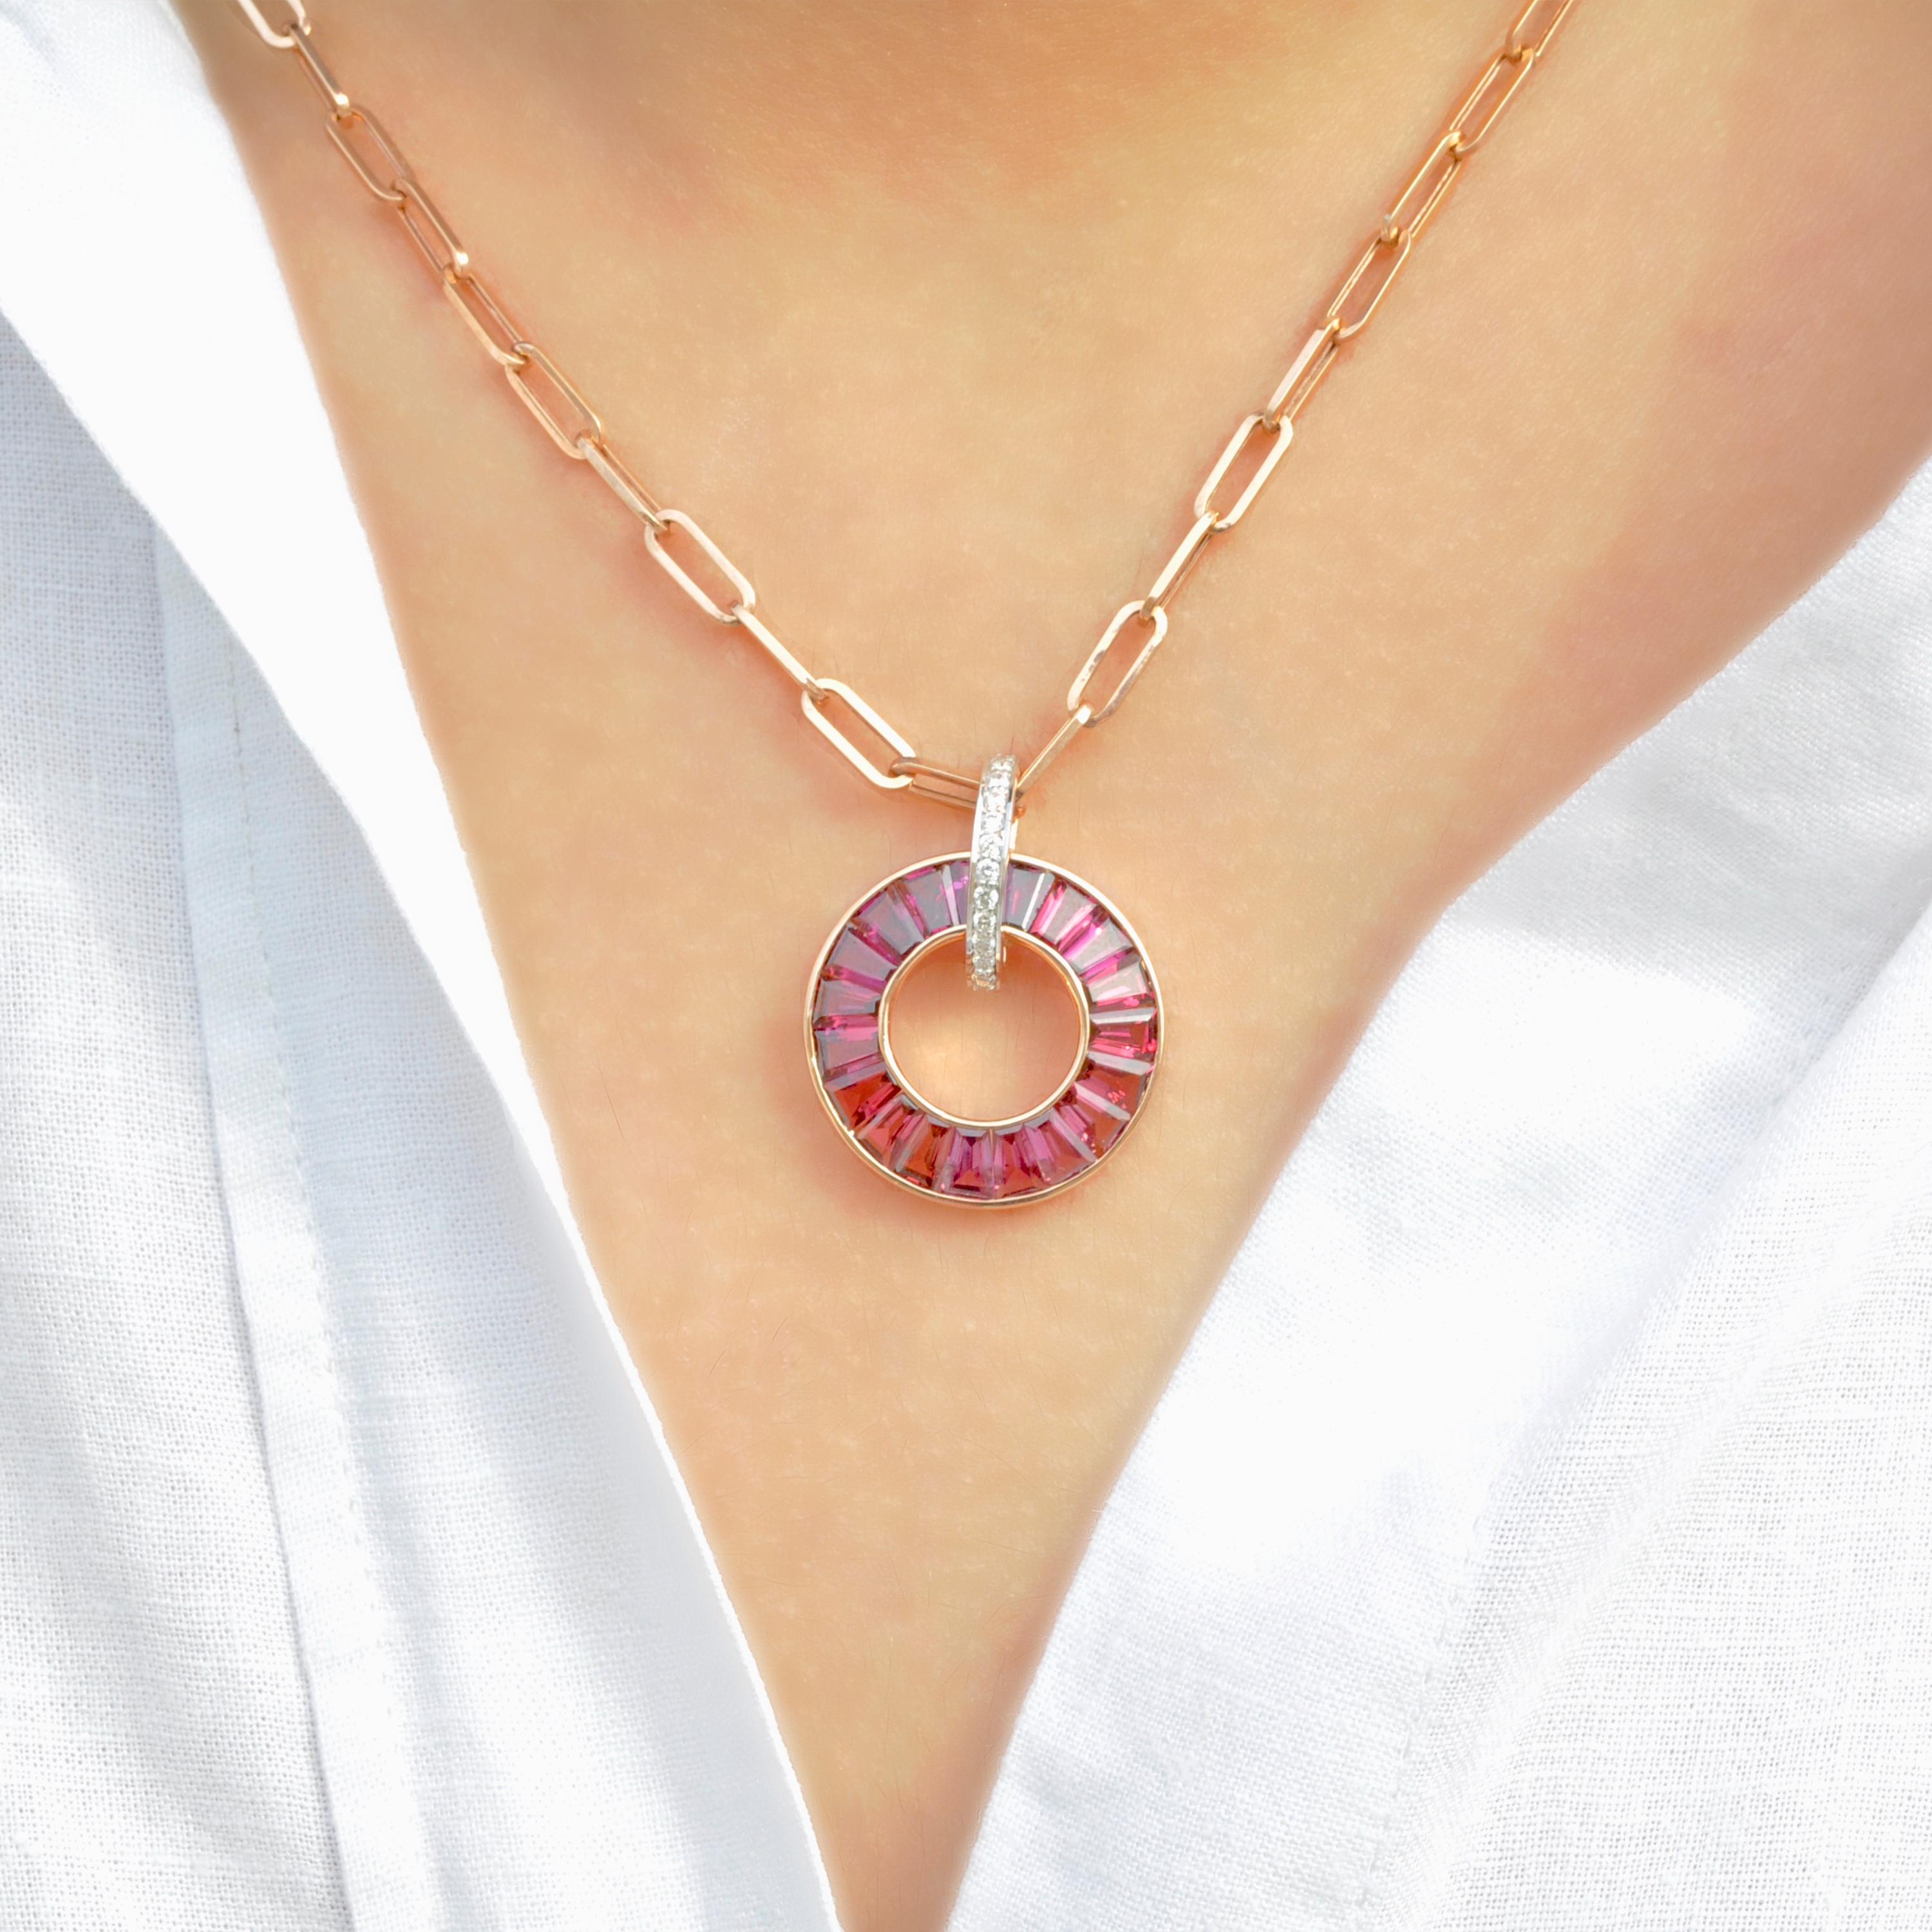 Introducing our 18k rose gold rhodolite garnet diamond circle pendant necklace—a mesmerizing fusion of sophistication and contemporary design. Crafted in radiant 18-karat gold, this pendant features a graceful circle adorned with the deep and rich